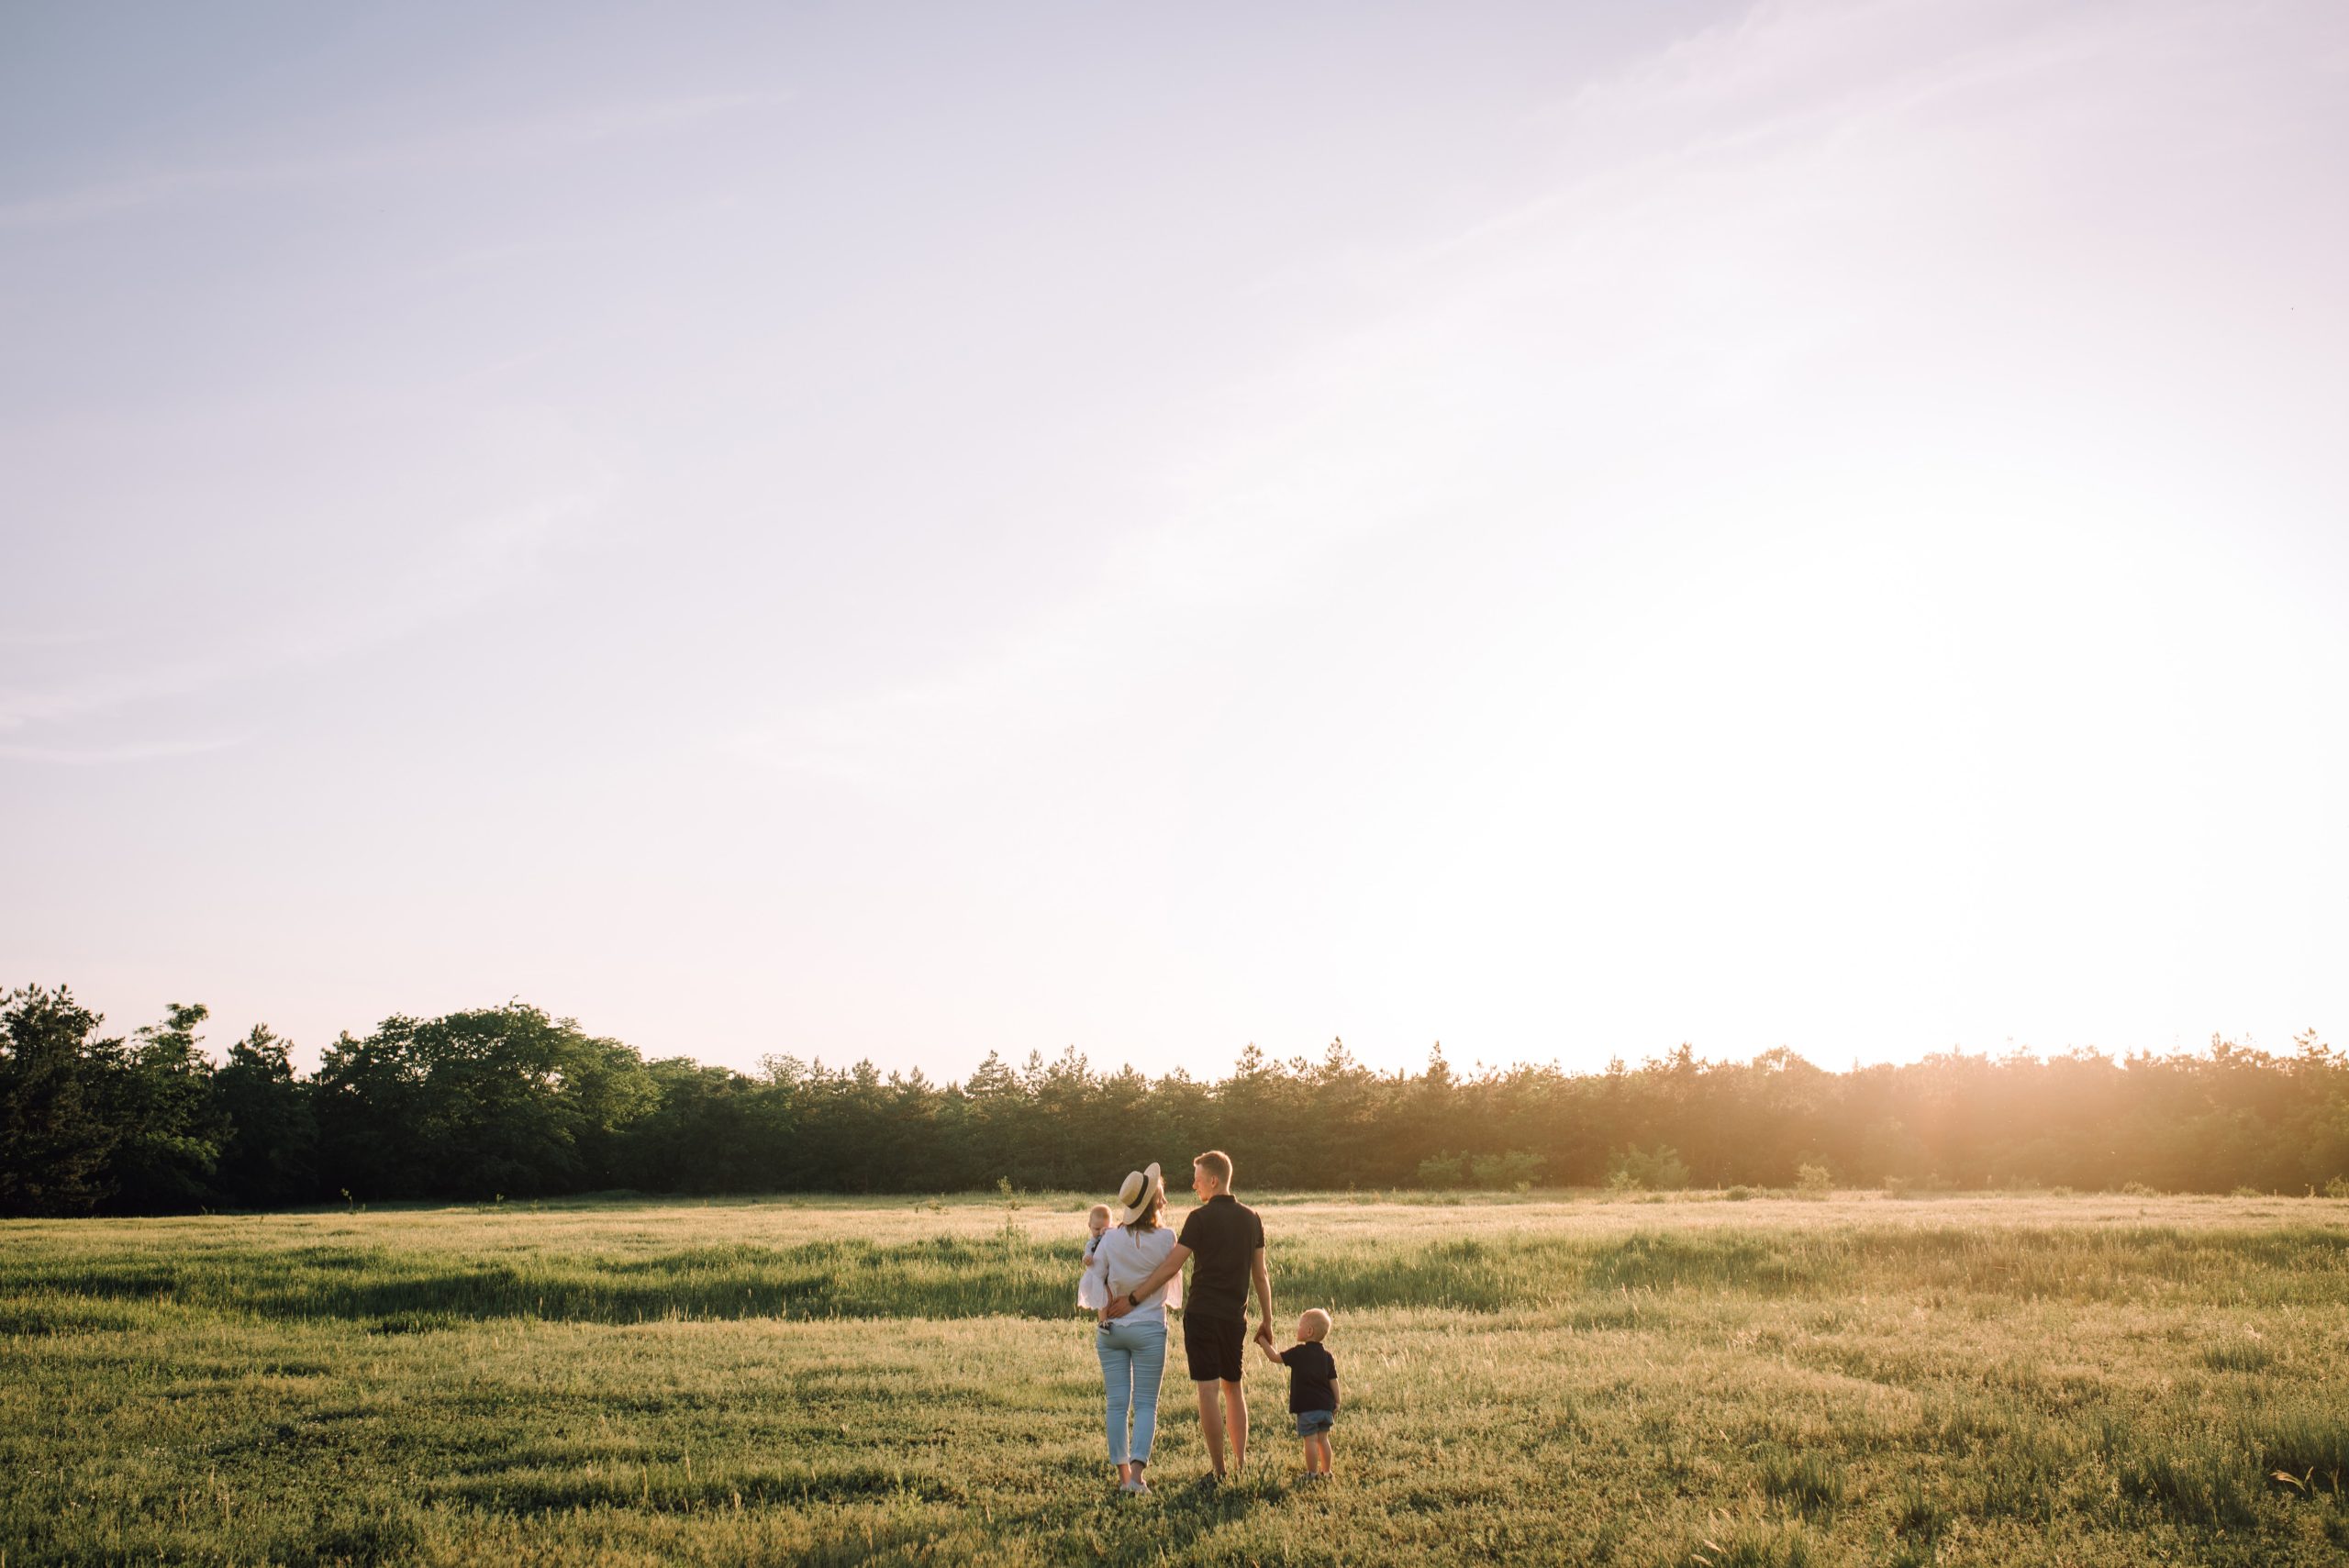 Family walking together in a wide open field